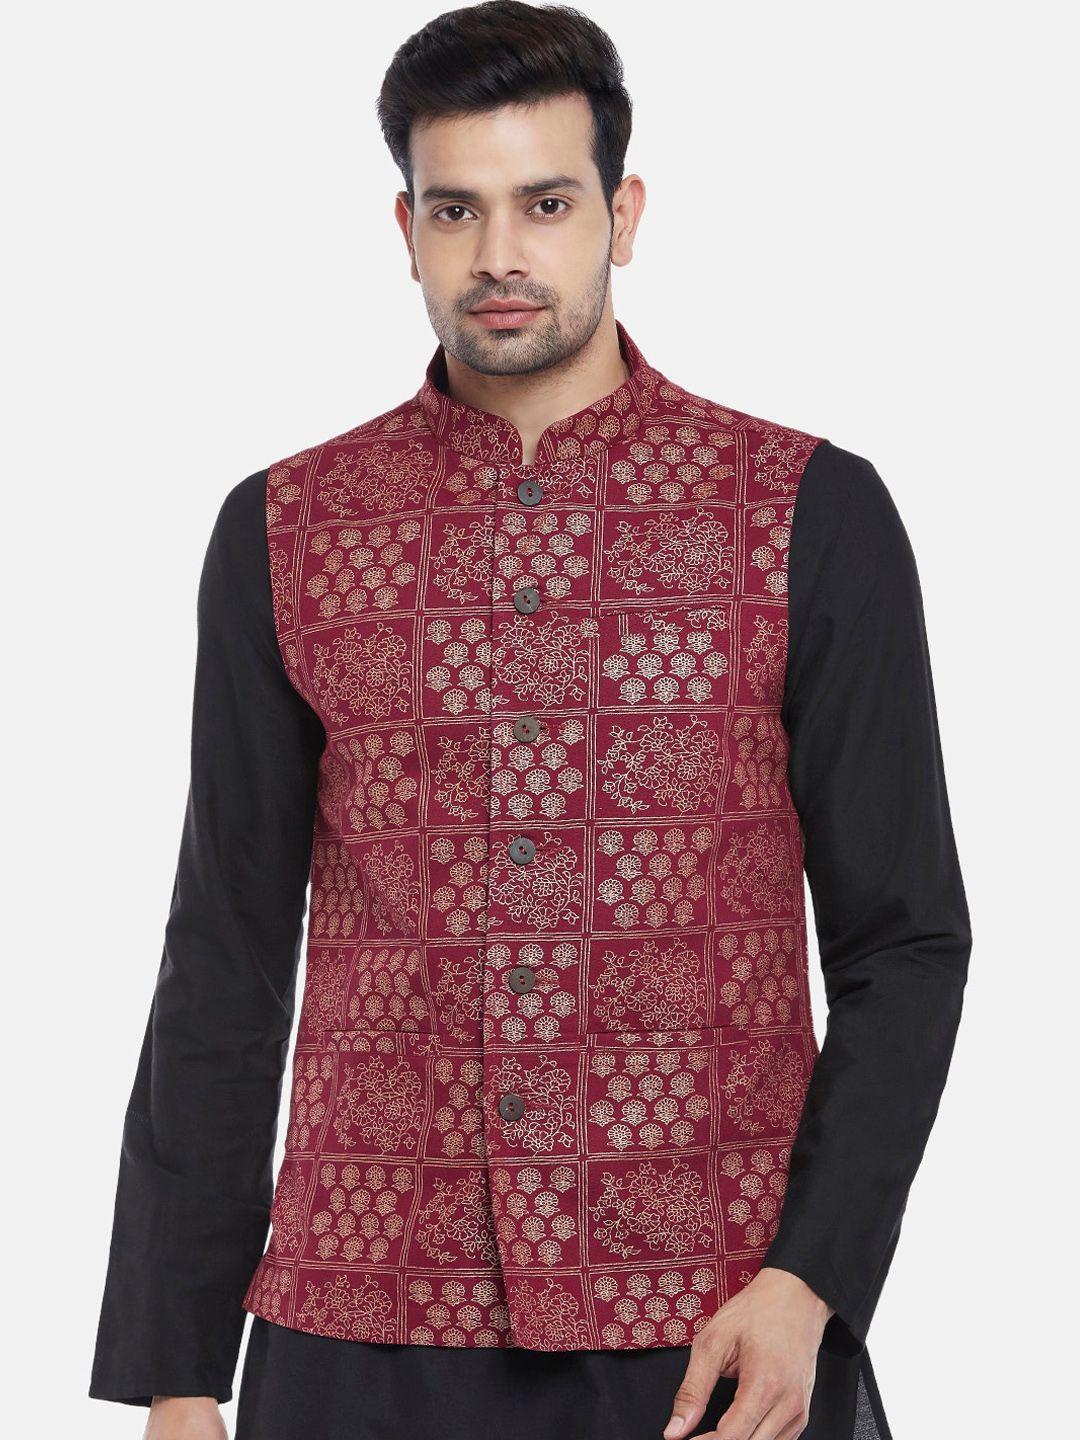 indus route by pantaloons men maroon ethnic motifs printed pure cotton waistcoat